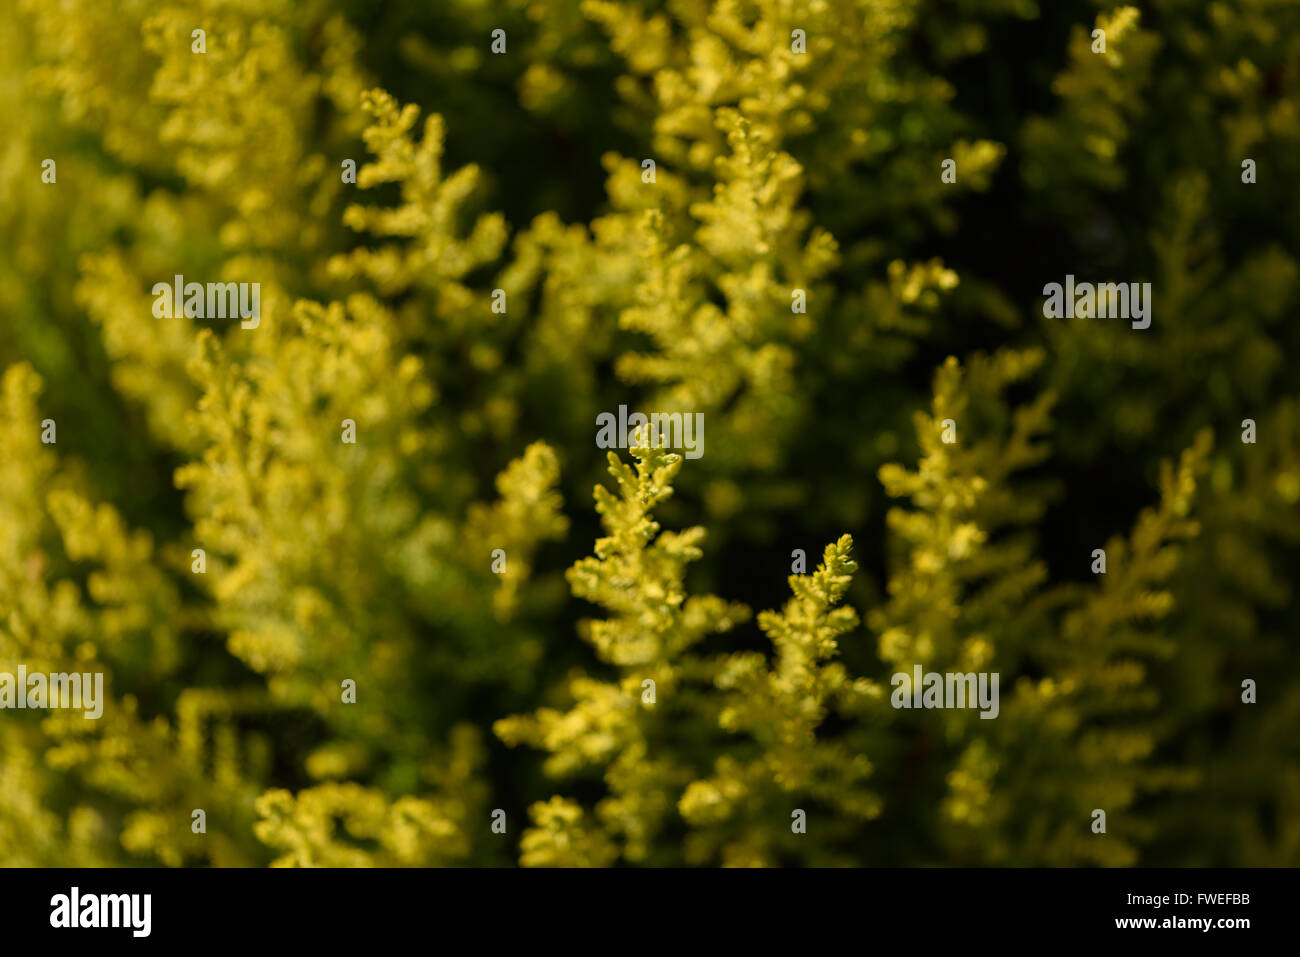 A very shallow depth of field shot focused on the tip of one branch of a green conifer tree. Stock Photo